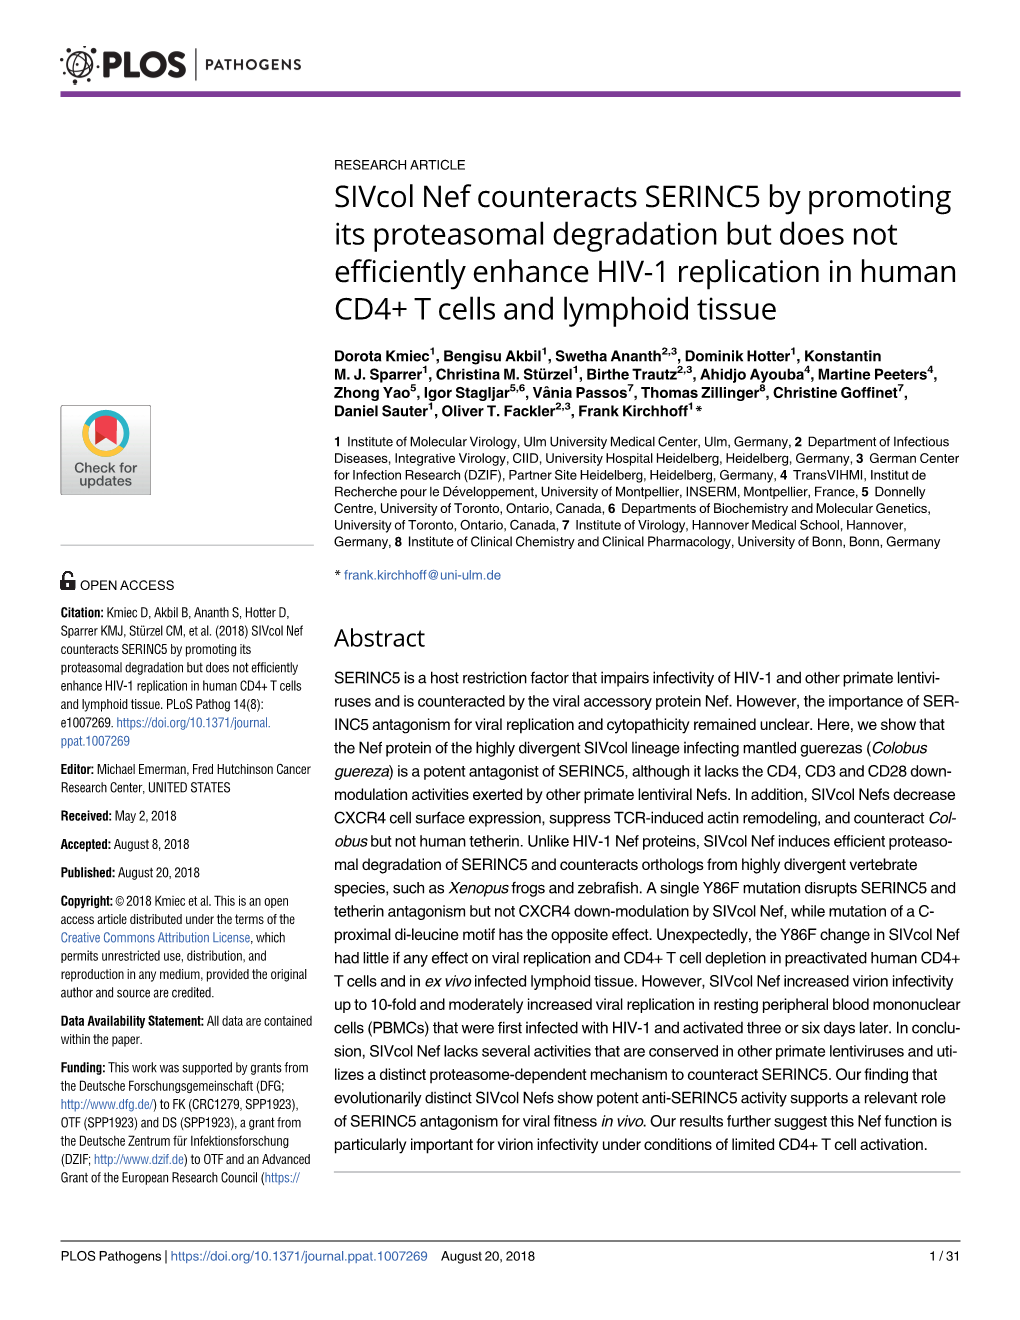 Sivcol Nef Counteracts SERINC5 by Promoting Its Proteasomal Degradation but Does Not Efficiently Enhance HIV-1 Replication in Human CD4+ T Cells and Lymphoid Tissue